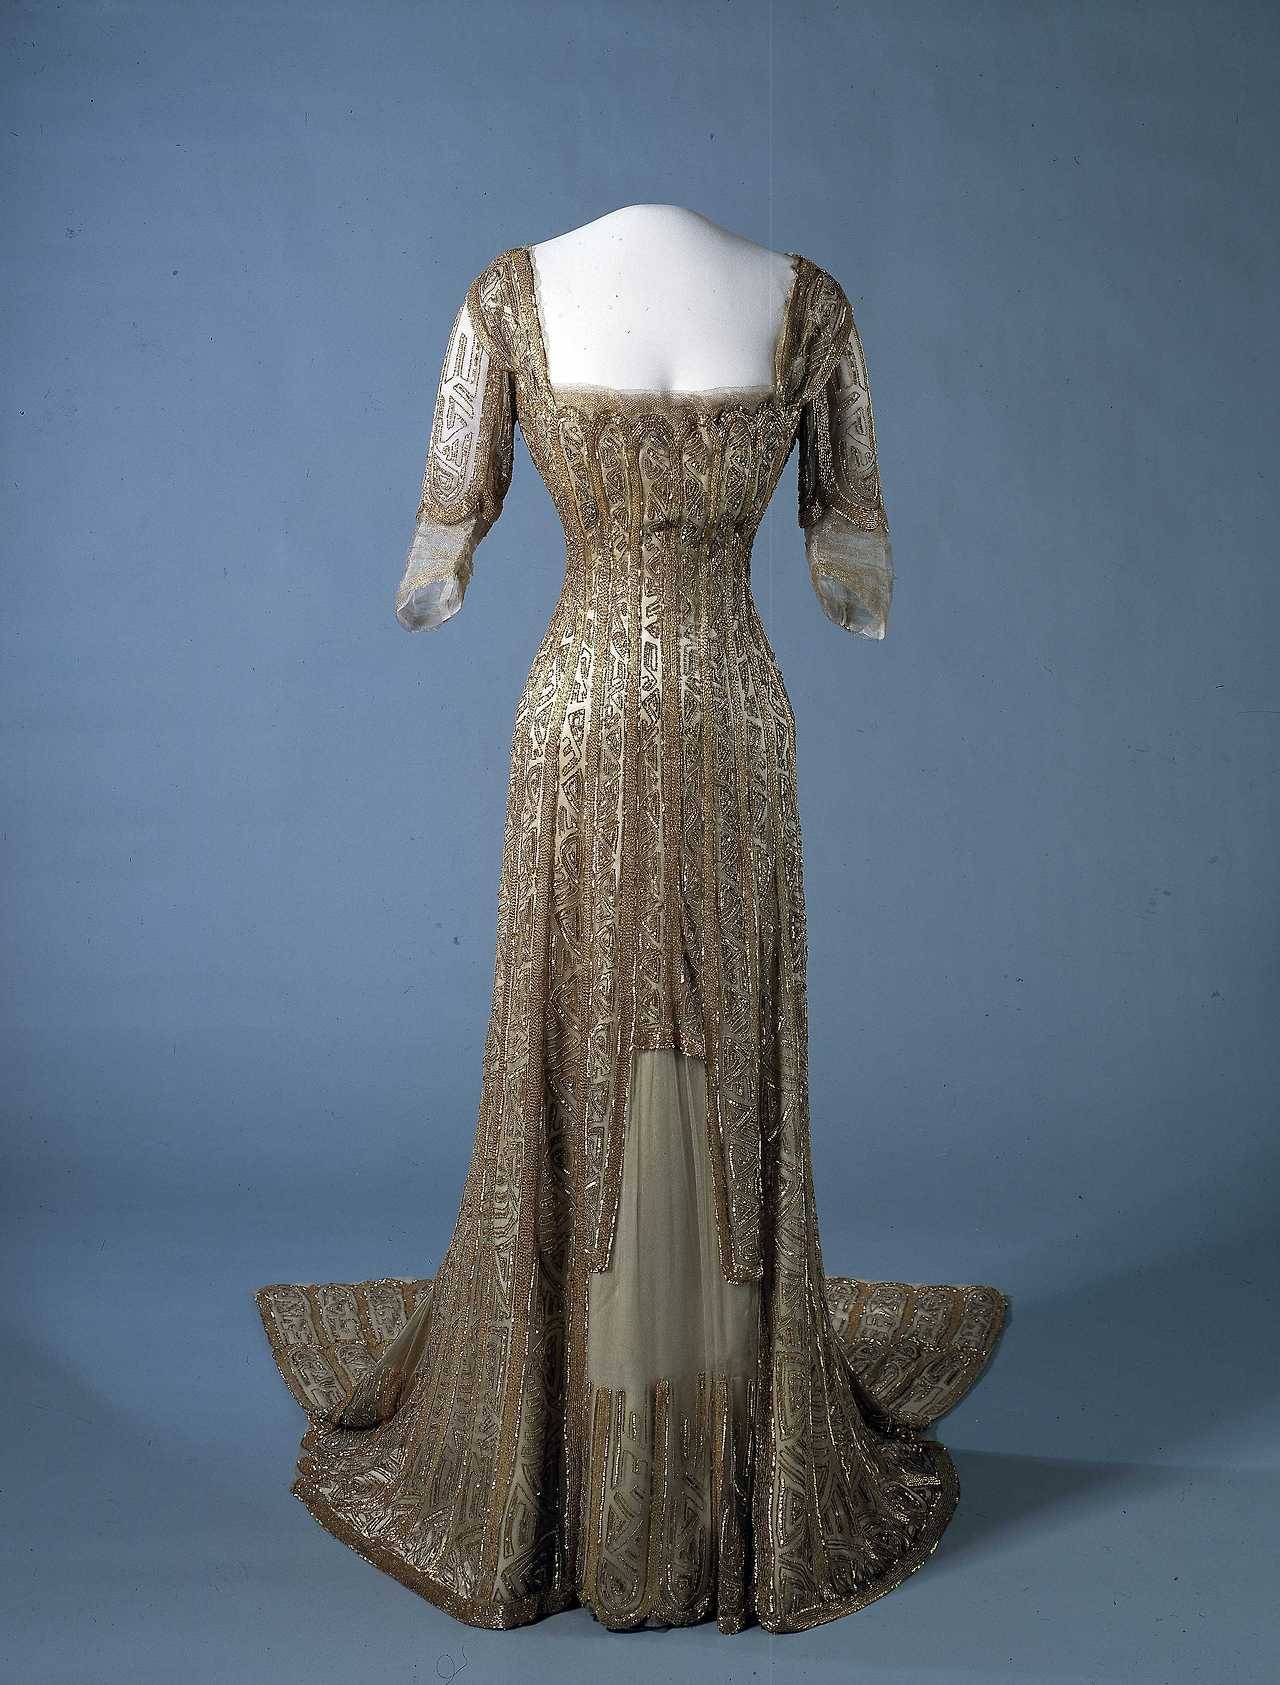 17th to late 20th Centuries Fashion: A Look Back — • Dress. Date: 1907-1909